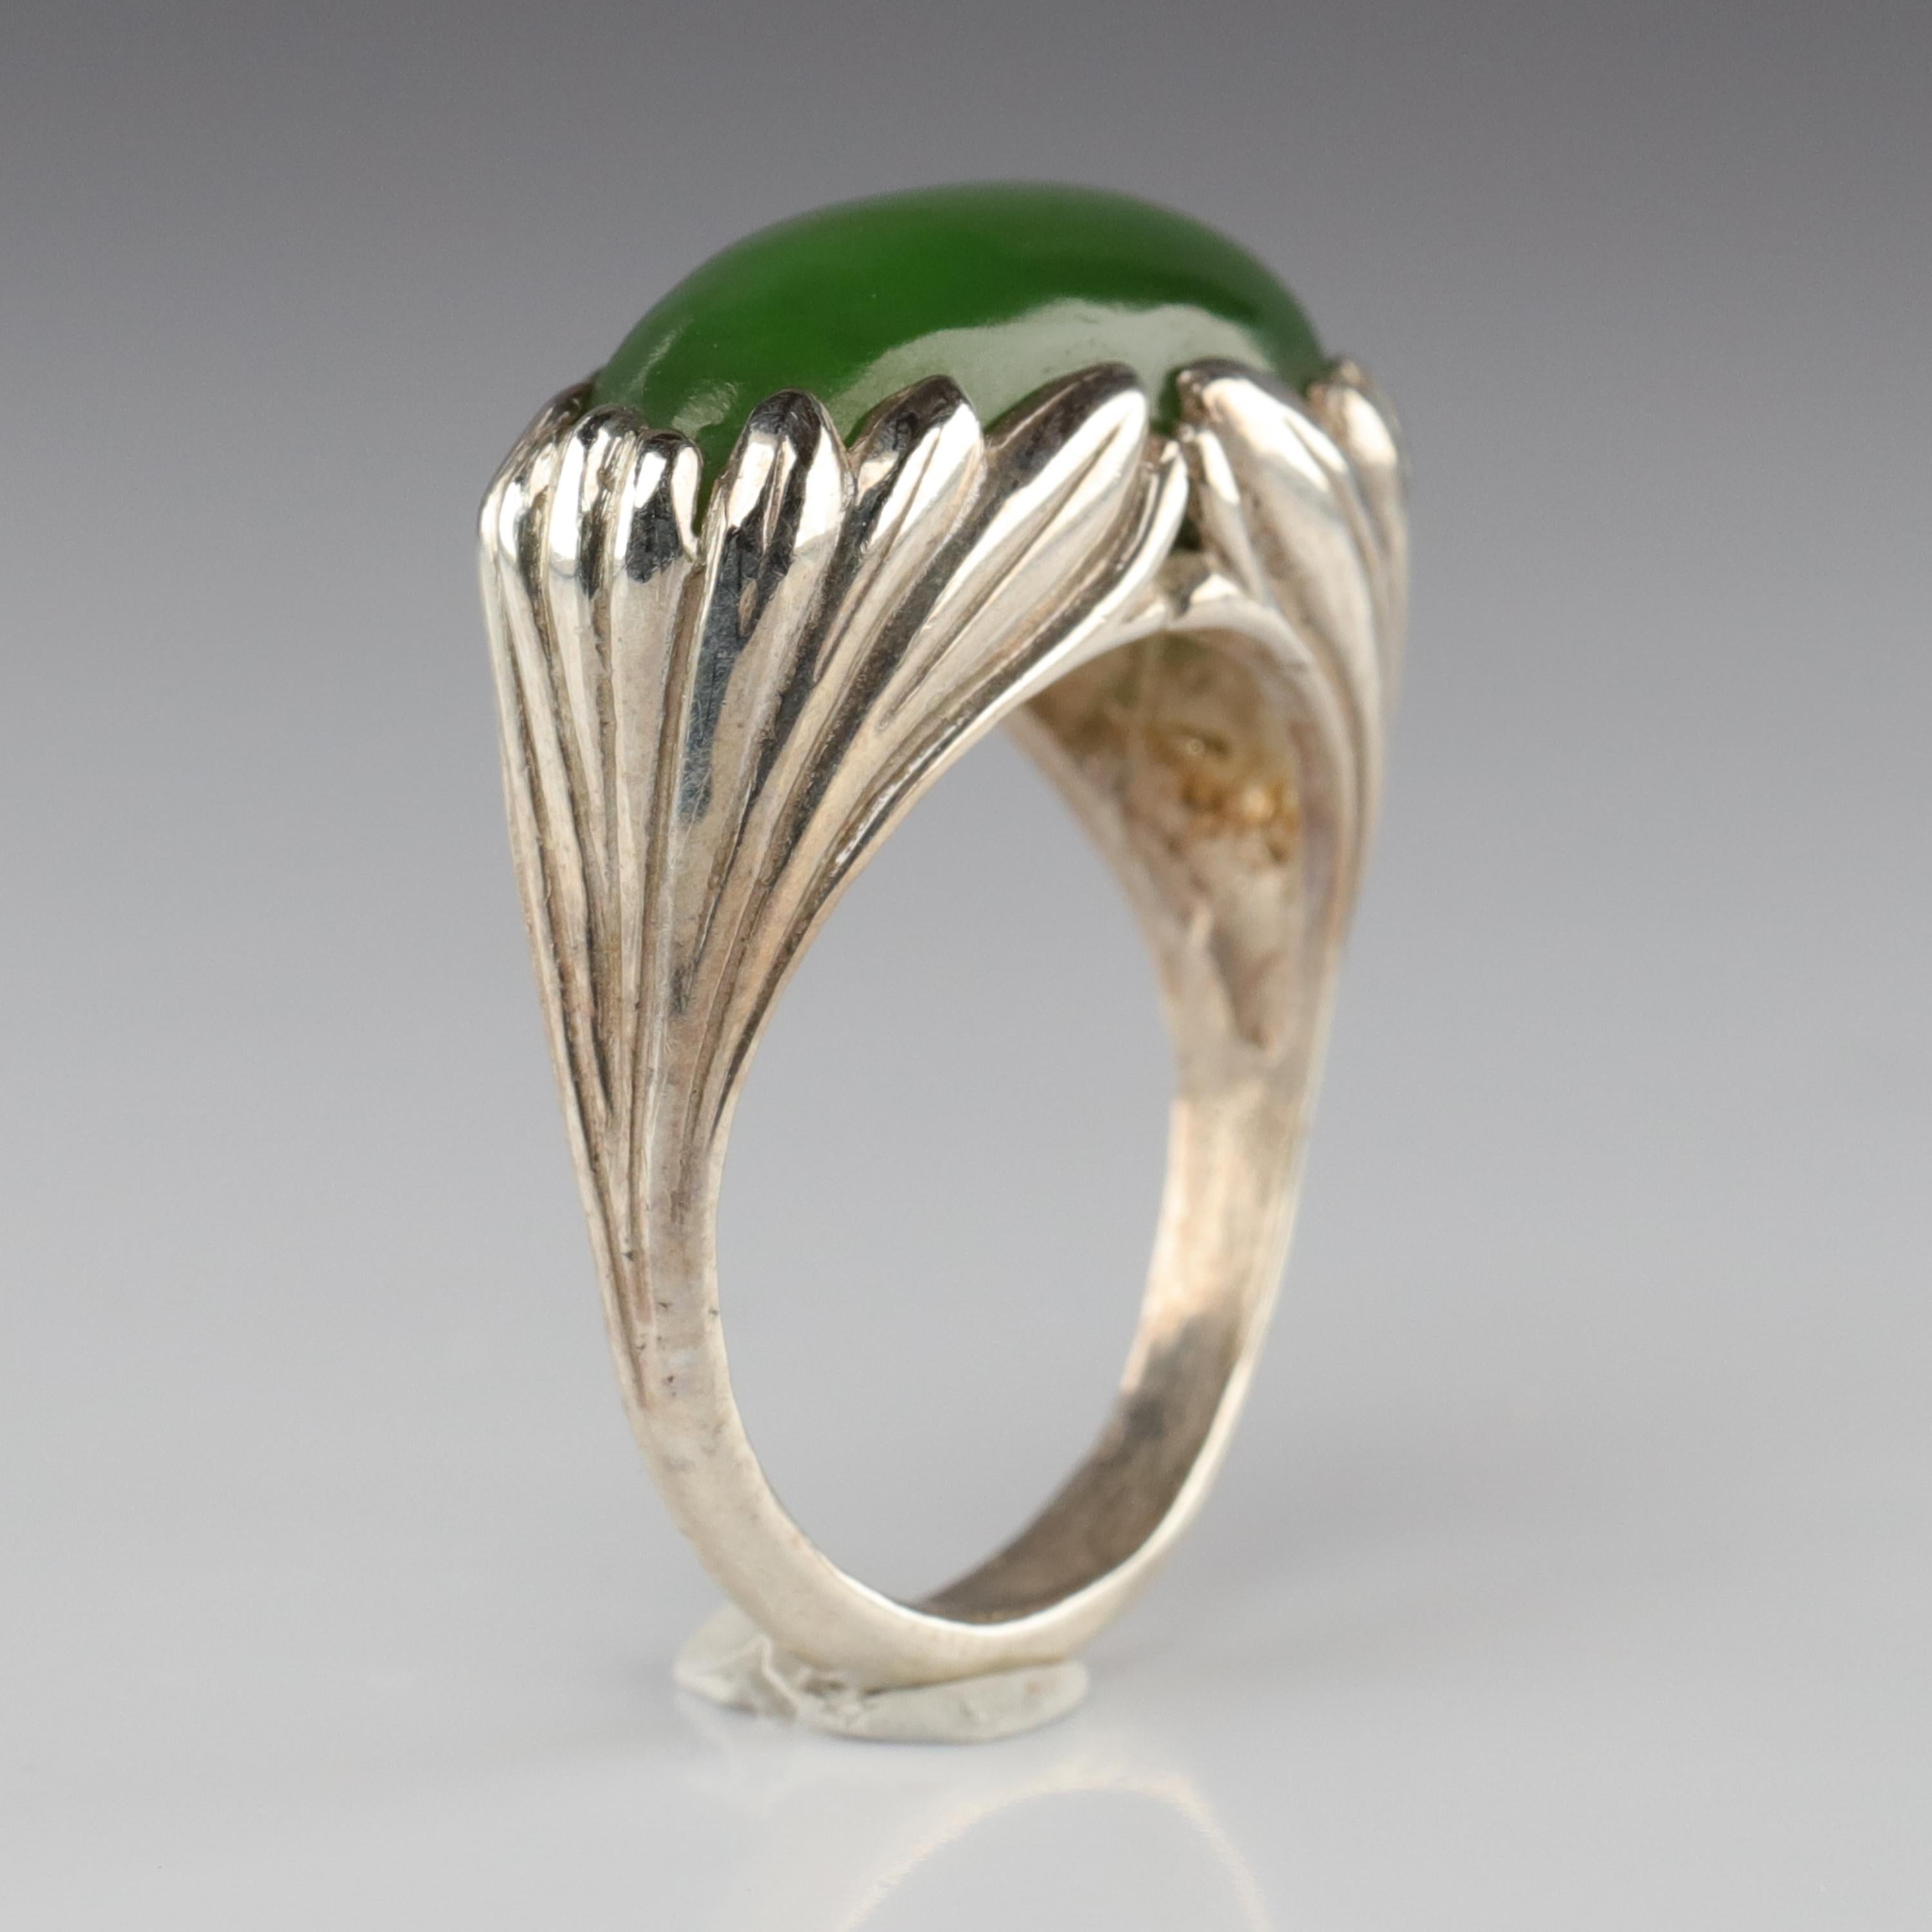 Not one but two artists created this ring. And it could be from the Art Nouveau era; the gorgeous symmetry of the carved silver clutching the summer-green jade cabochon, looking like something tucked beside a country stream. But this is not an